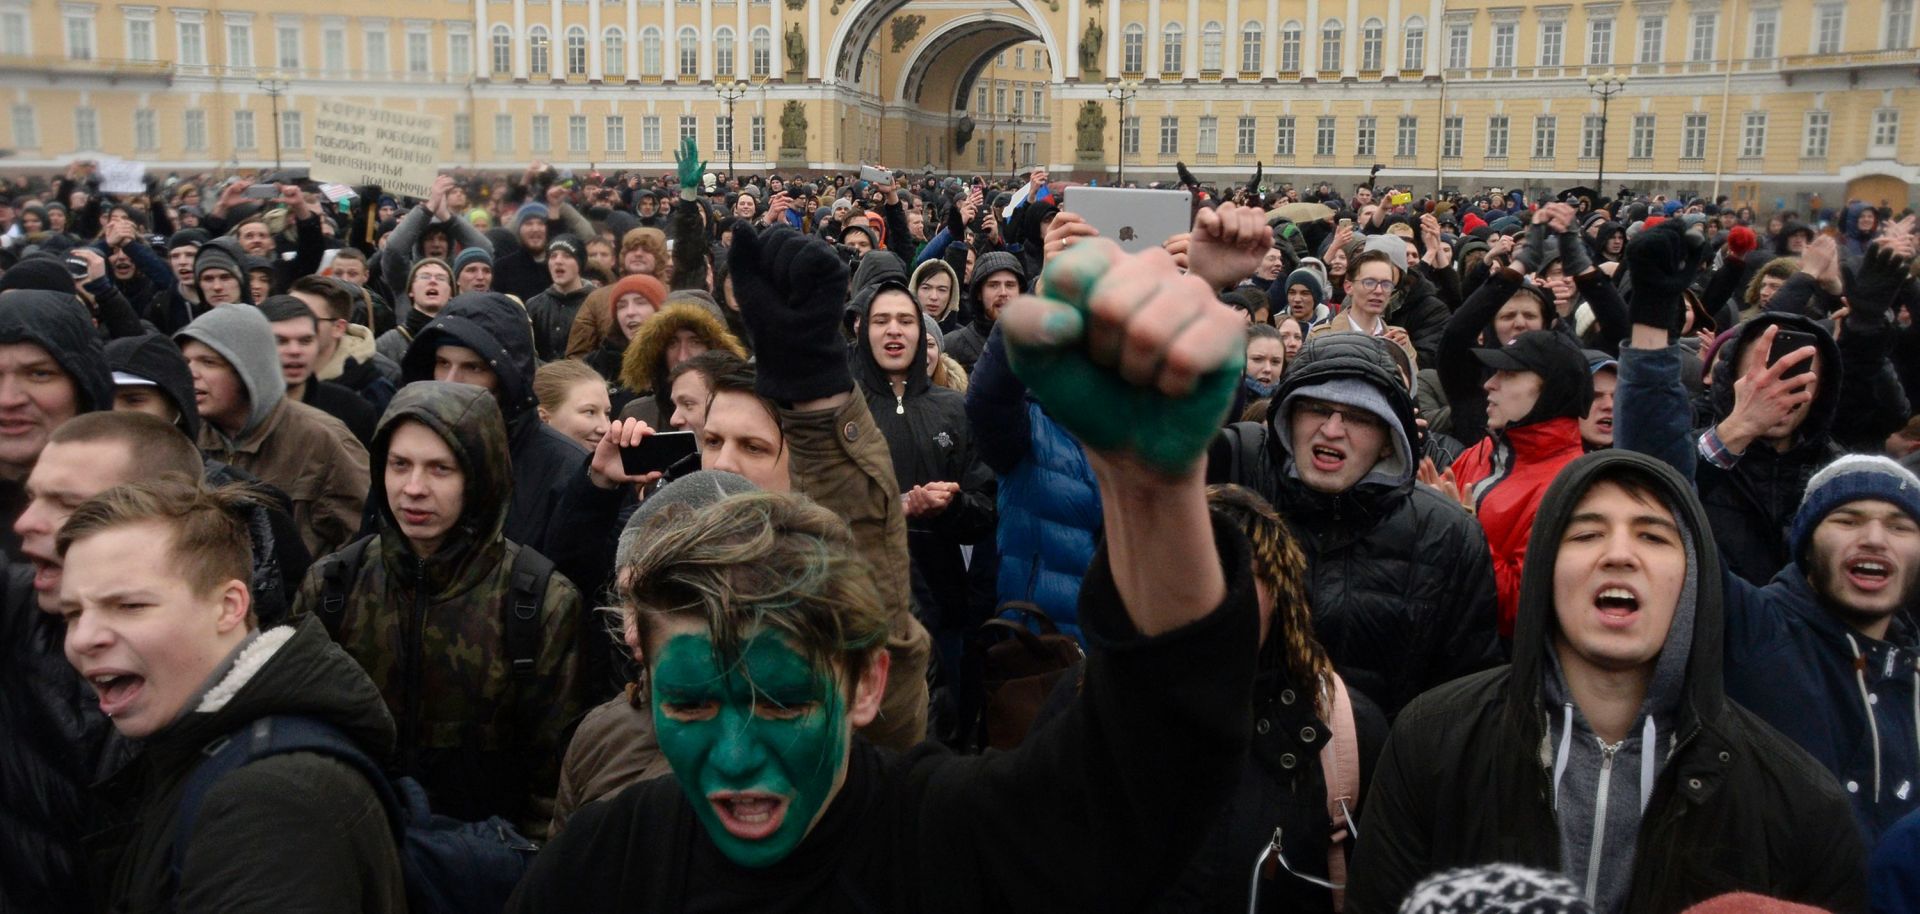 Russian teens have flooded into the streets across the country not because of Western sanctions or foundering industries, but because of a sullen sense of injustice.